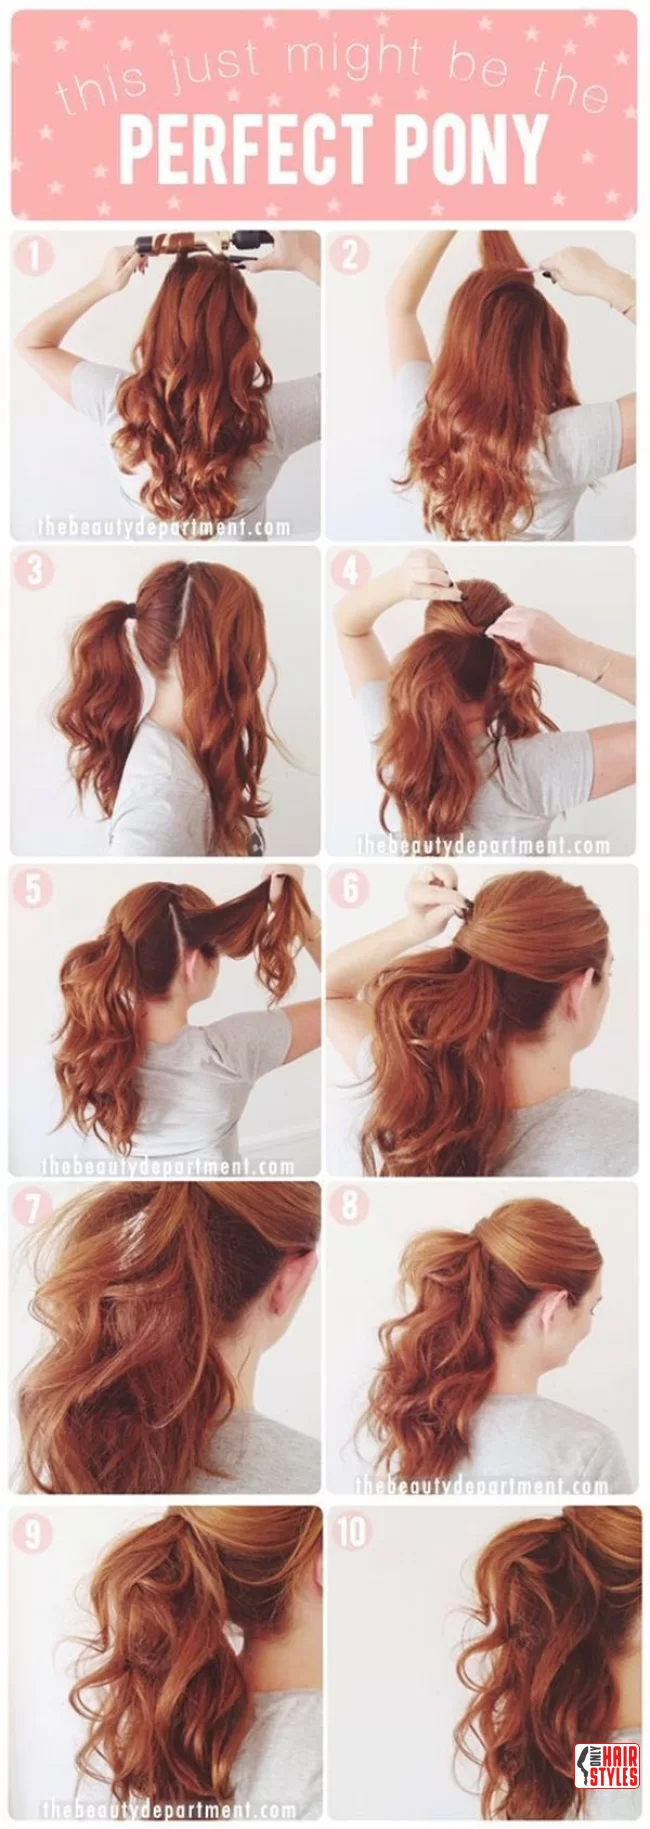 Perfect Ponytail for Long Thick Hair | 10 Easy Step By Step Hair Tutorials For Chic Hairstyles